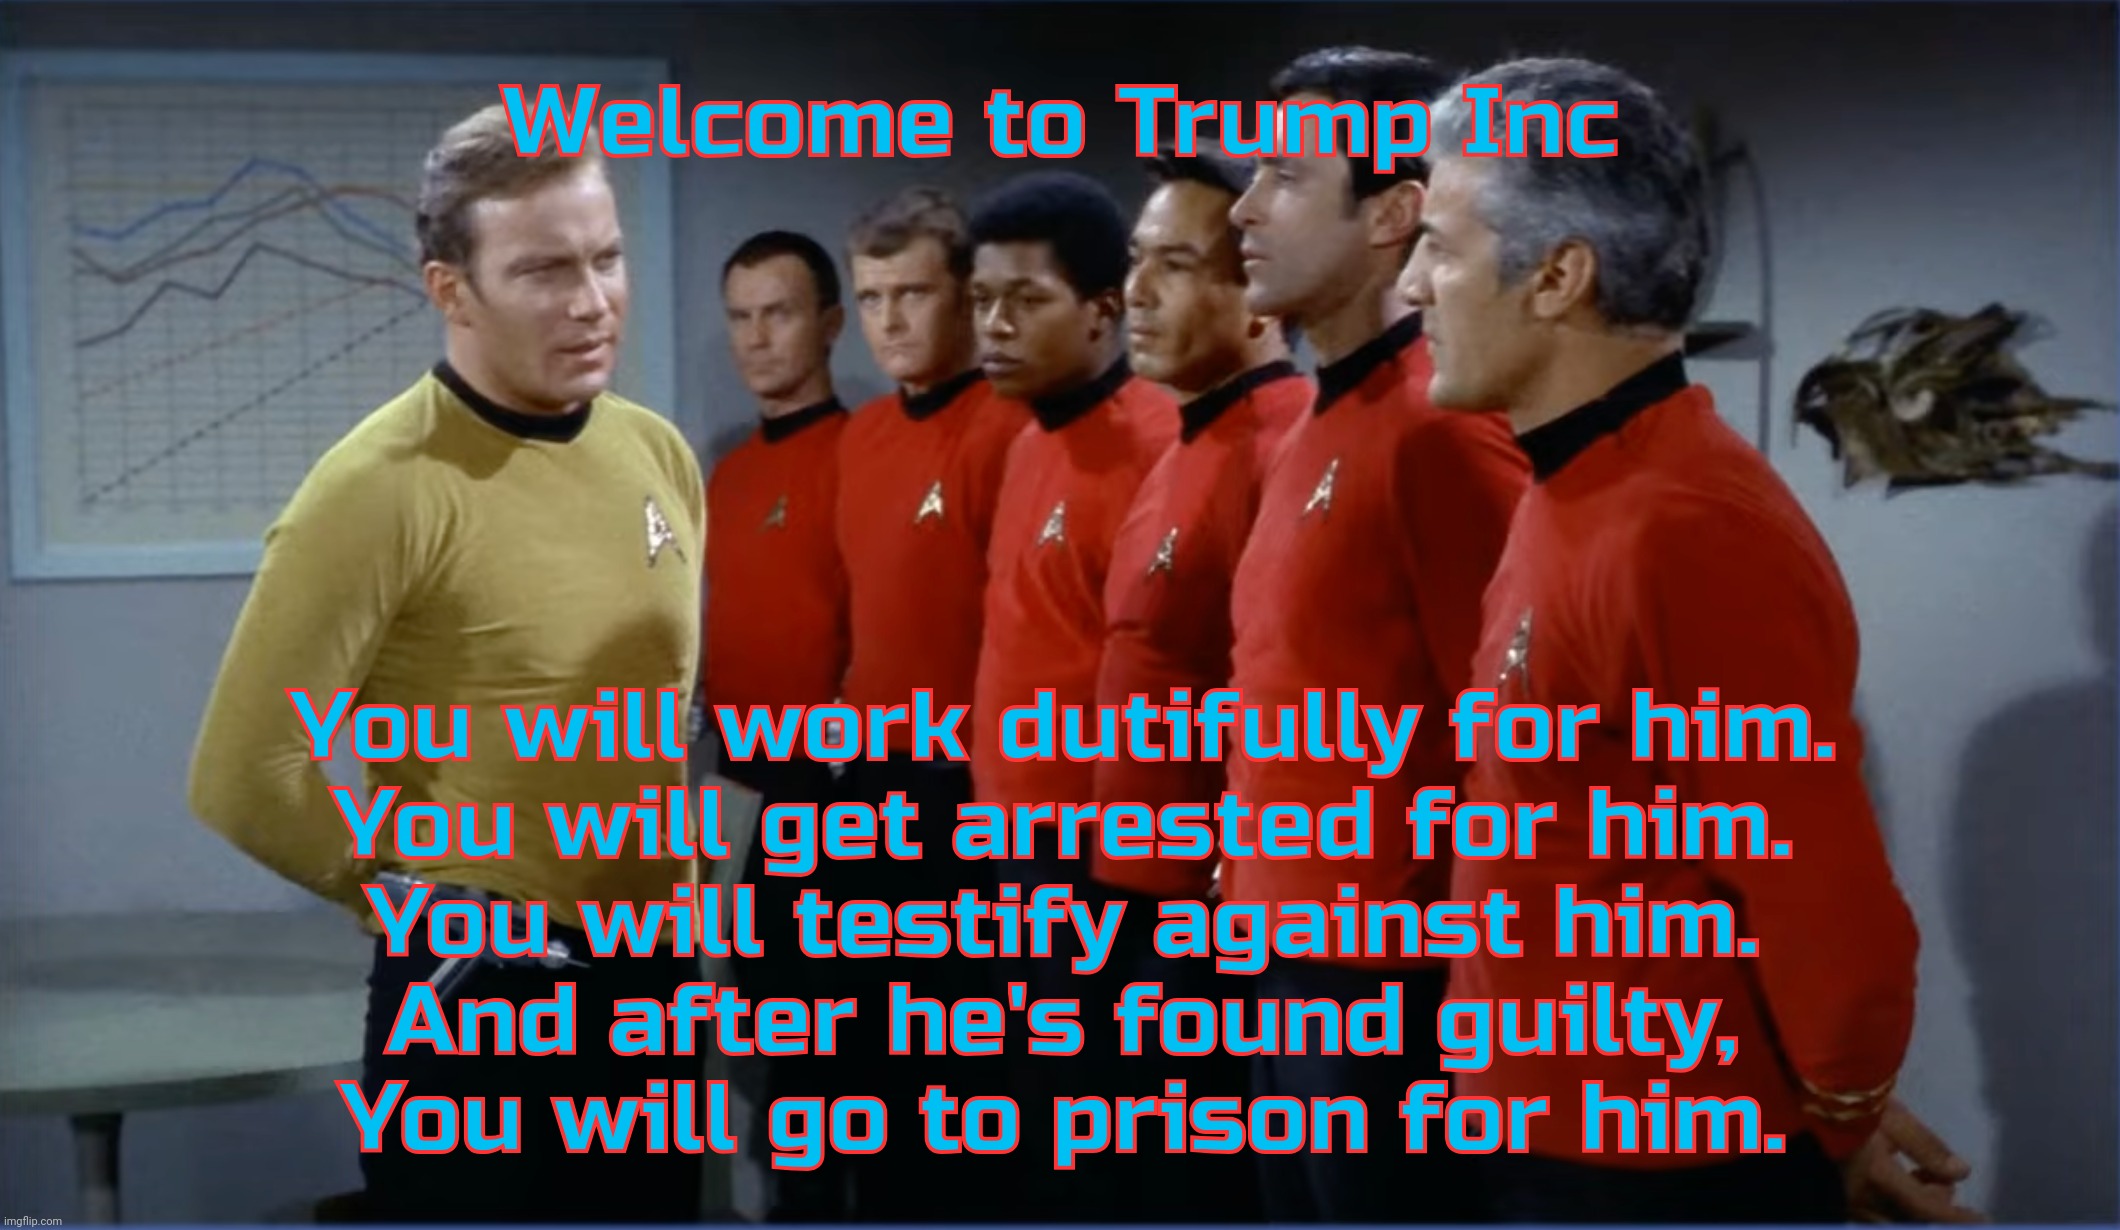 Because they're wearing red shirts, get it? | Welcome to Trump Inc; You will work dutifully for him.
You will get arrested for him.
You will testify against him.
And after he's found guilty,
You will go to prison for him. | image tagged in star trek,star trek red shirts,red shirts,trump red shirts,donald trump,fall guys | made w/ Imgflip meme maker